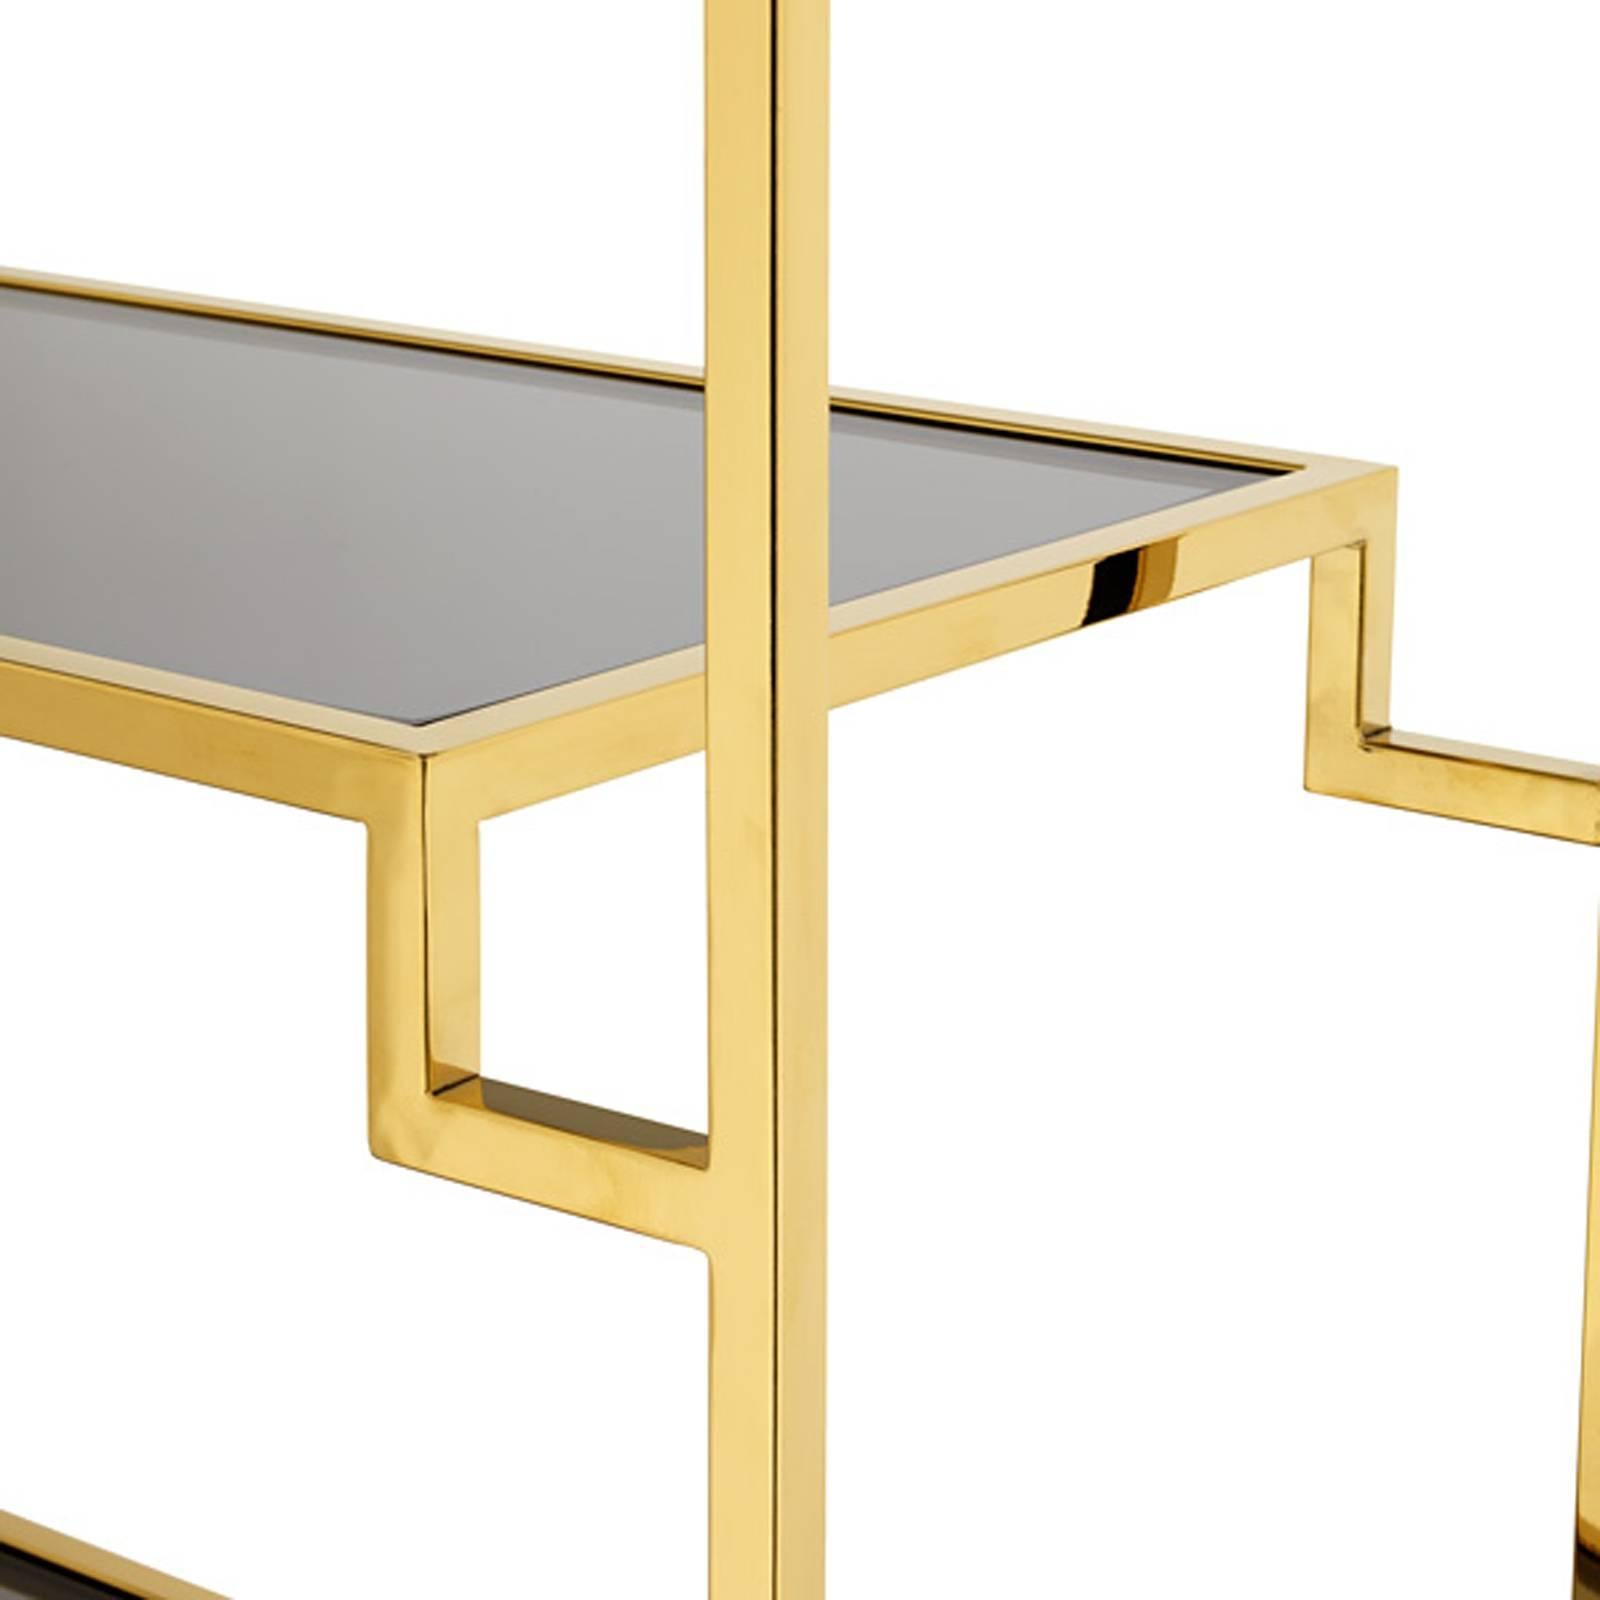 Contemporary Stantord Bookshelves in Gold Finish with Smoked Glass